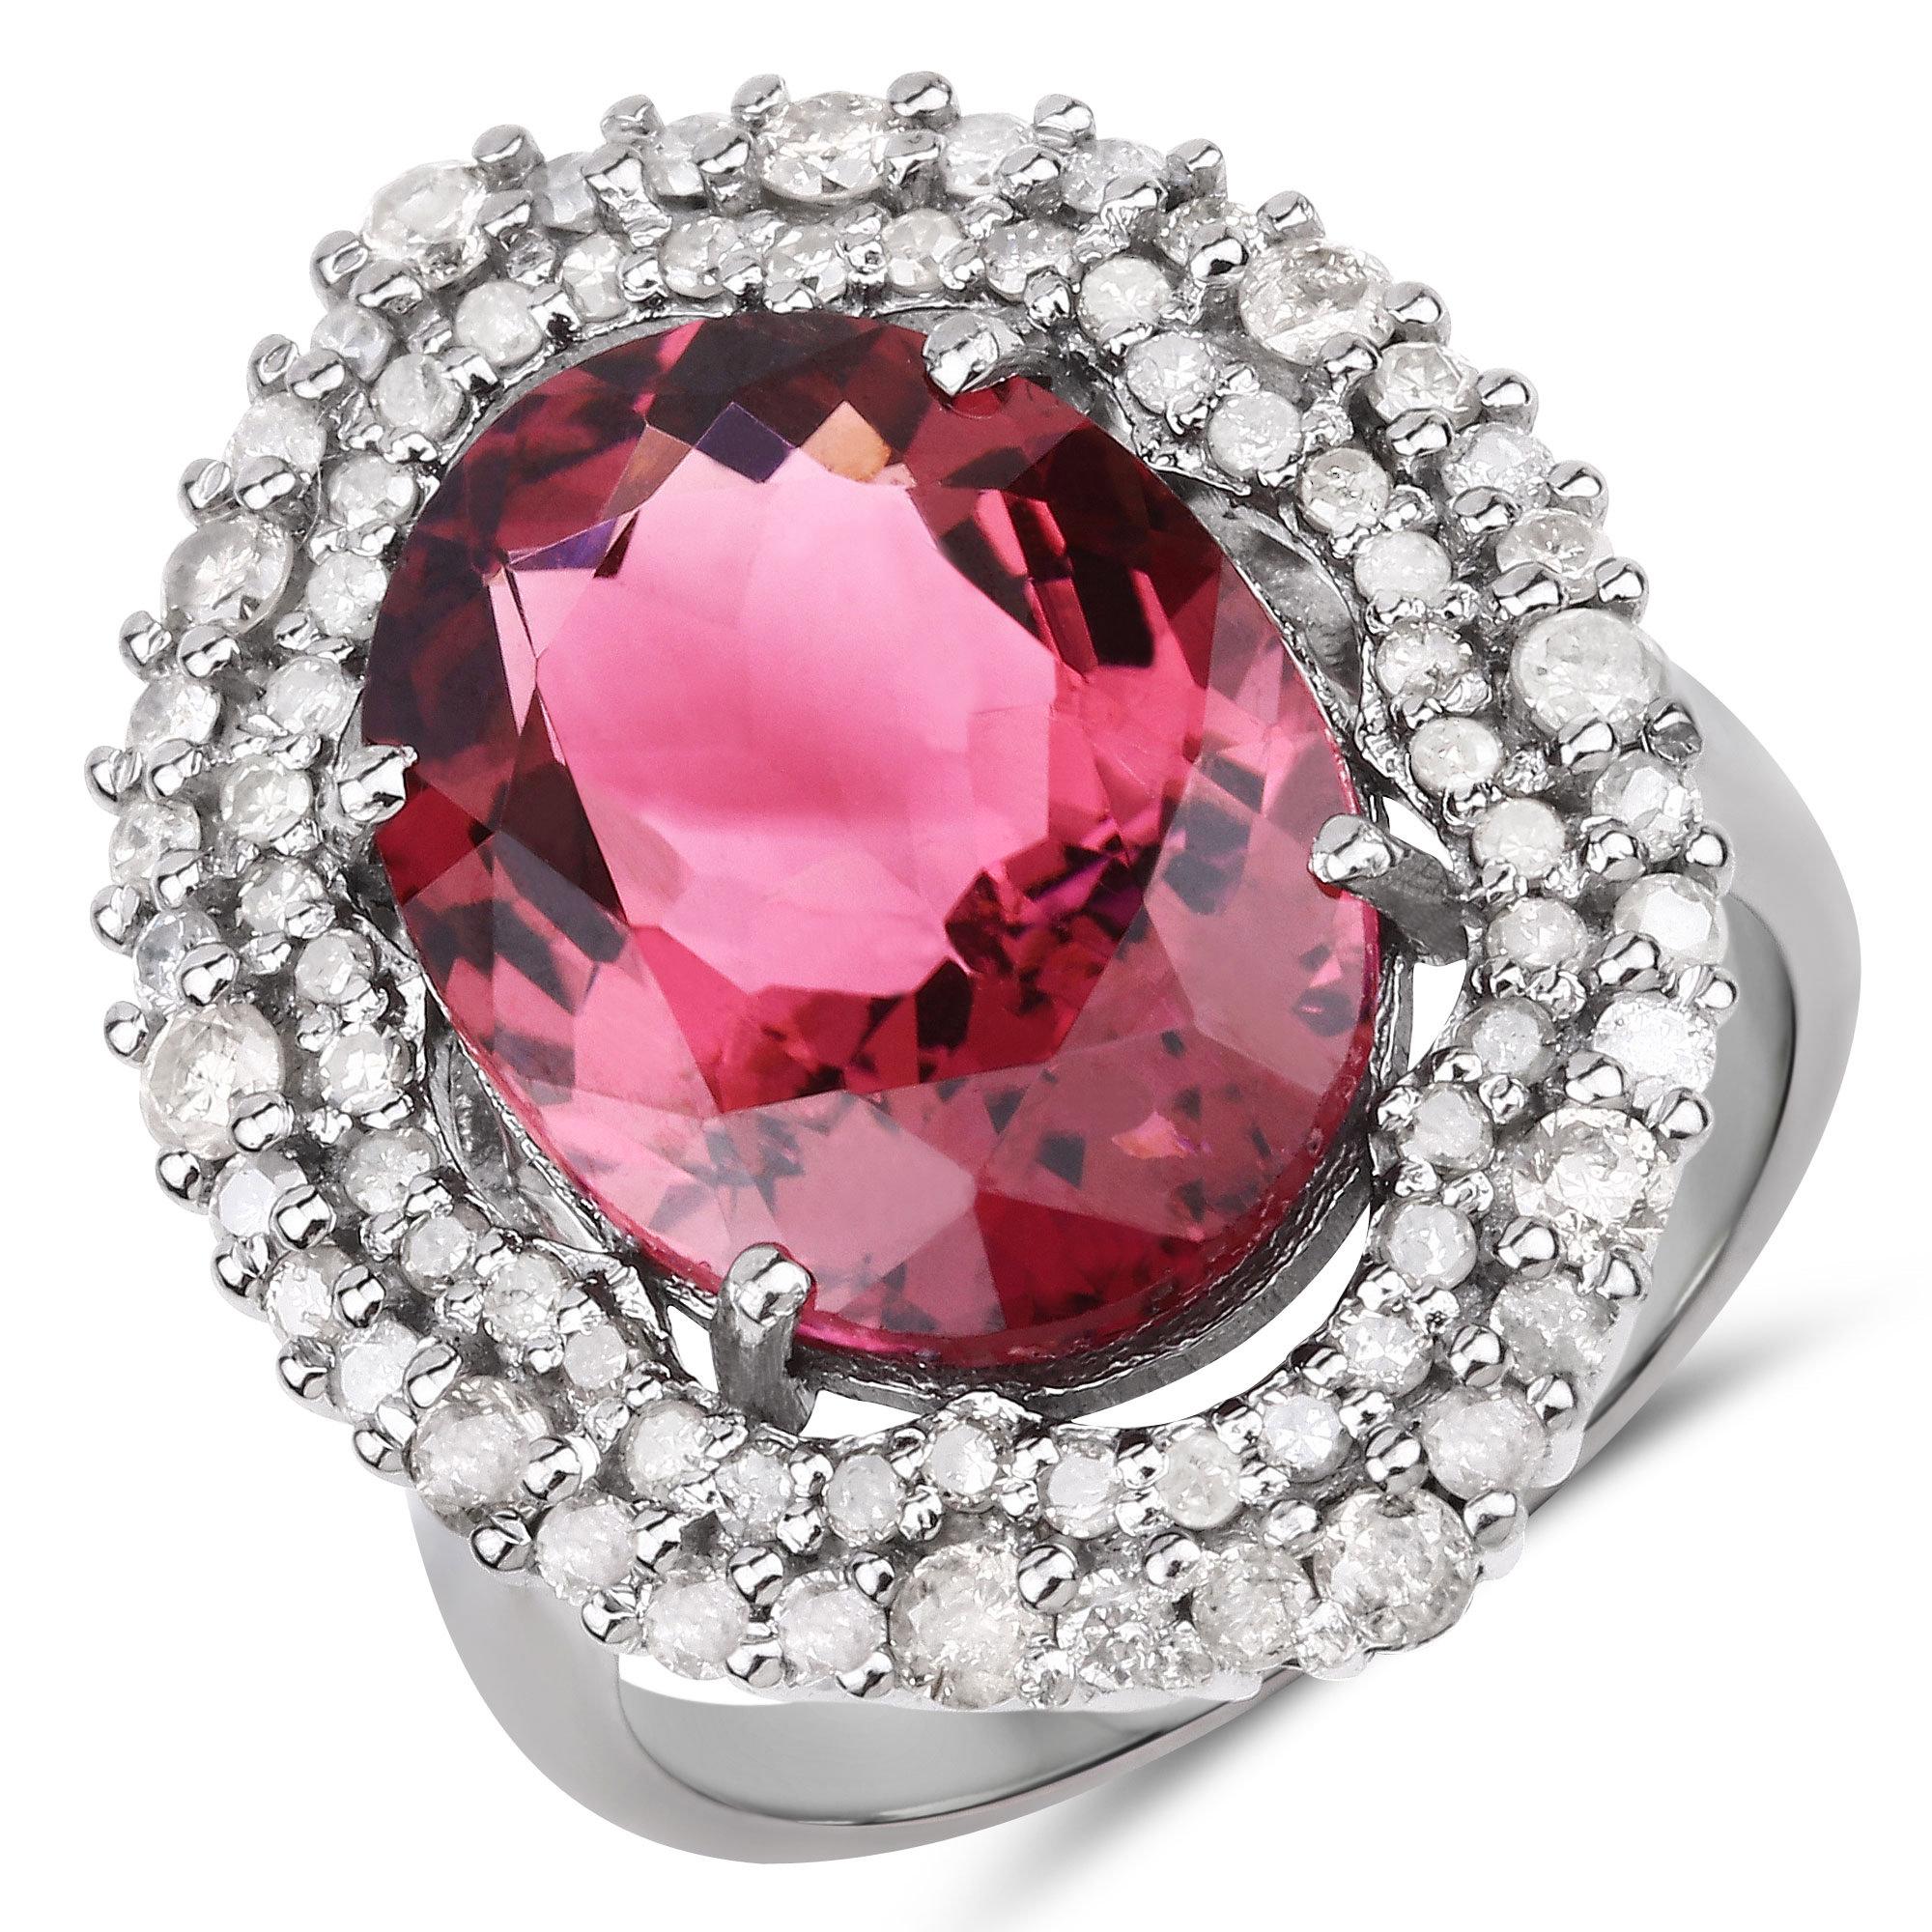 Contemporary Natural Pink Tourmaline Statement Ring With Diamonds 9 Carats Total For Sale